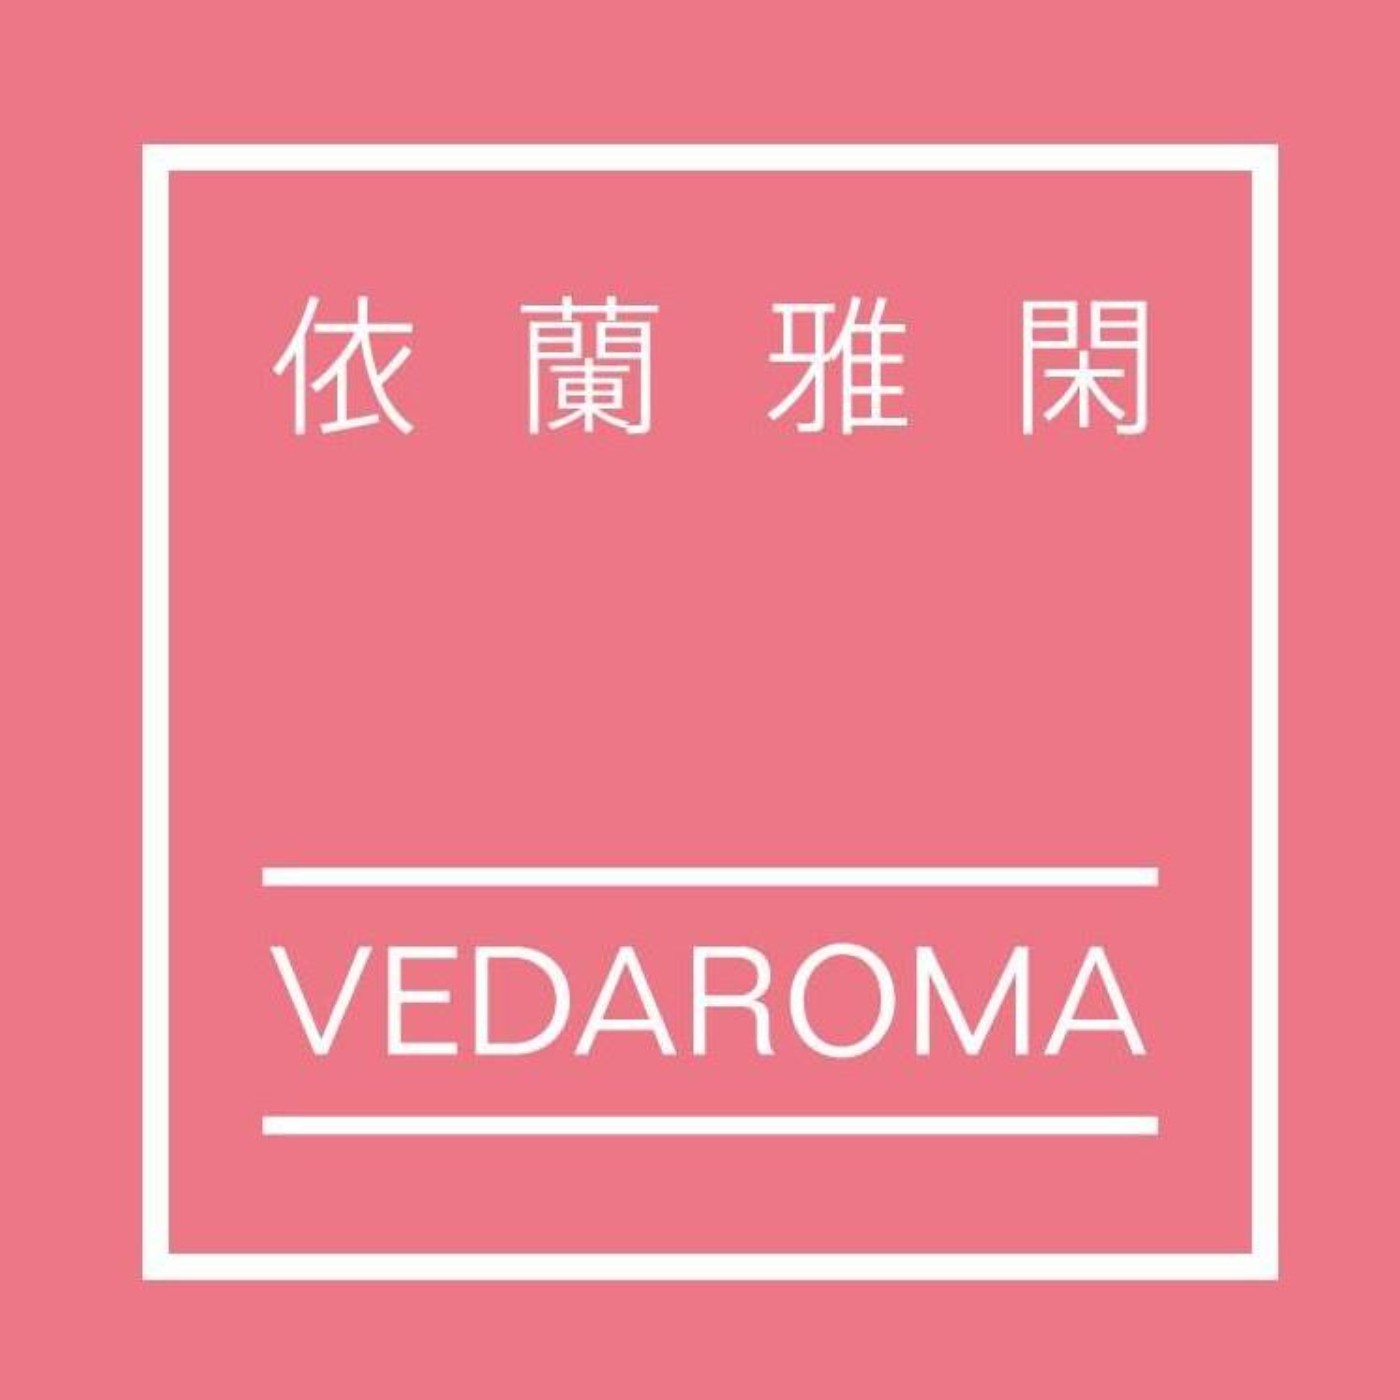 Vedaroma Is Happiness